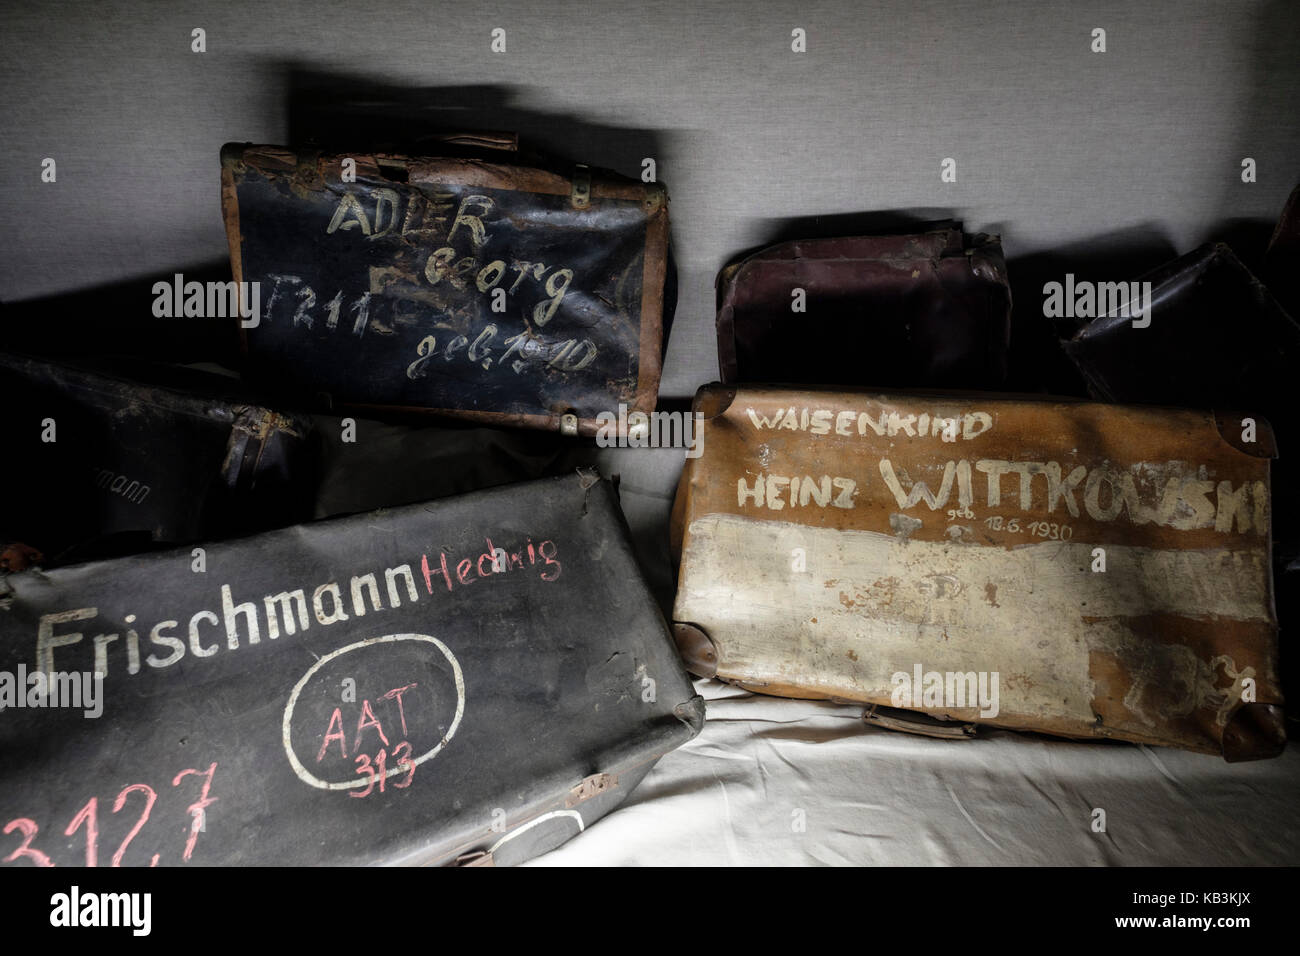 Suitcases belonging to prisoners at Auschwitz WWII Nazi concentration camp, Poland Stock Photo